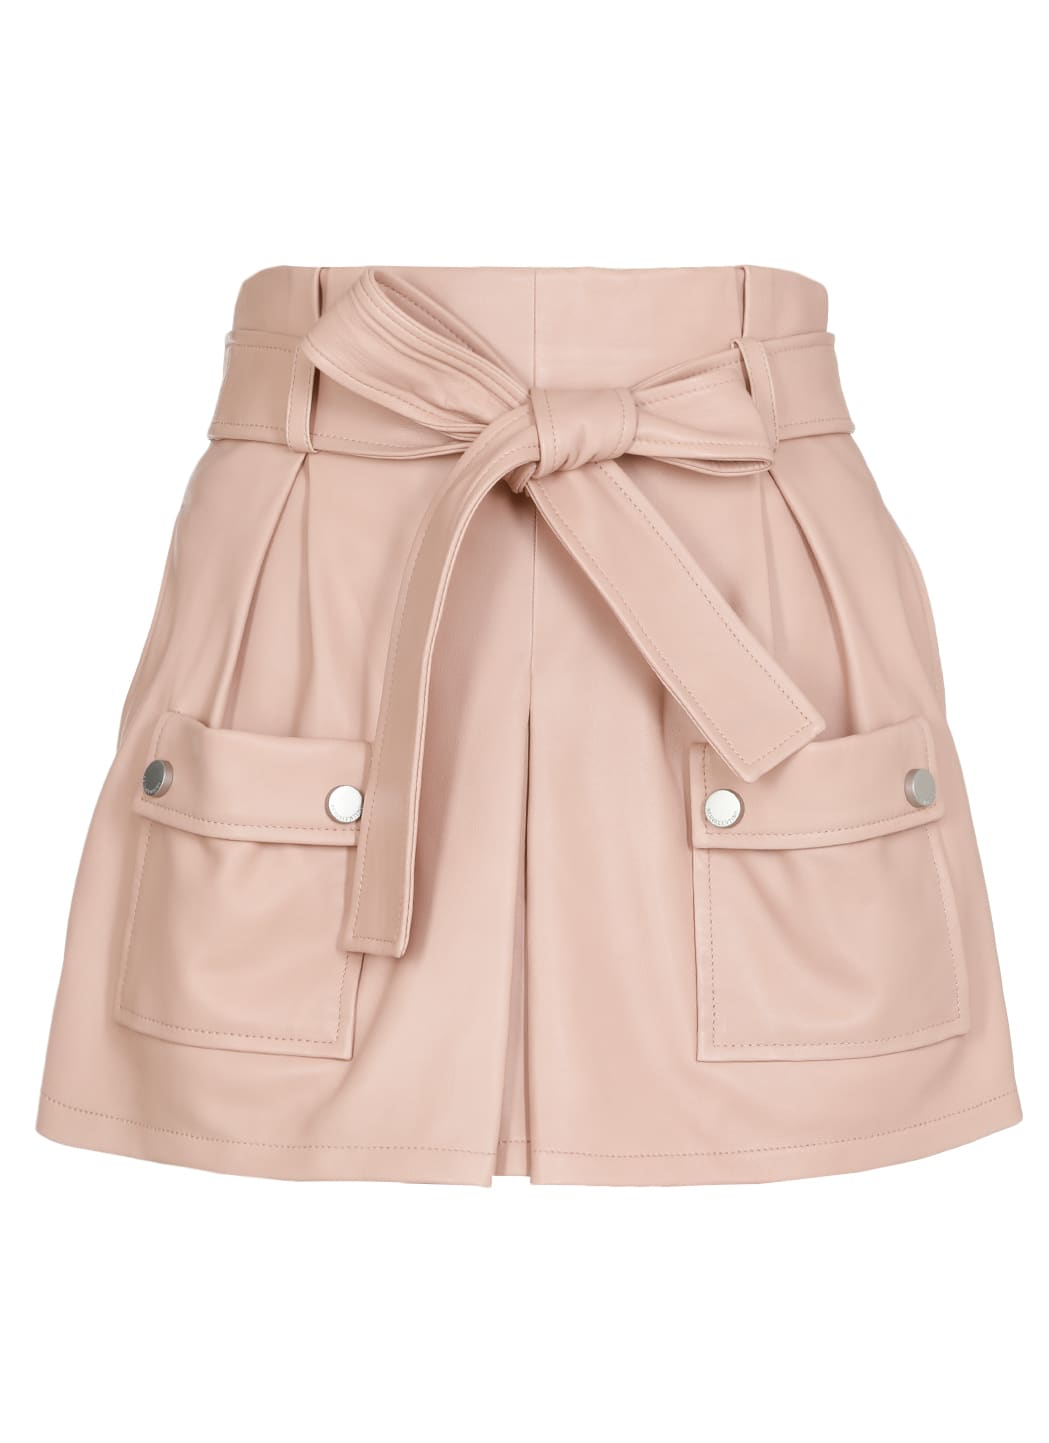 RED Valentino Leather Short With Belt